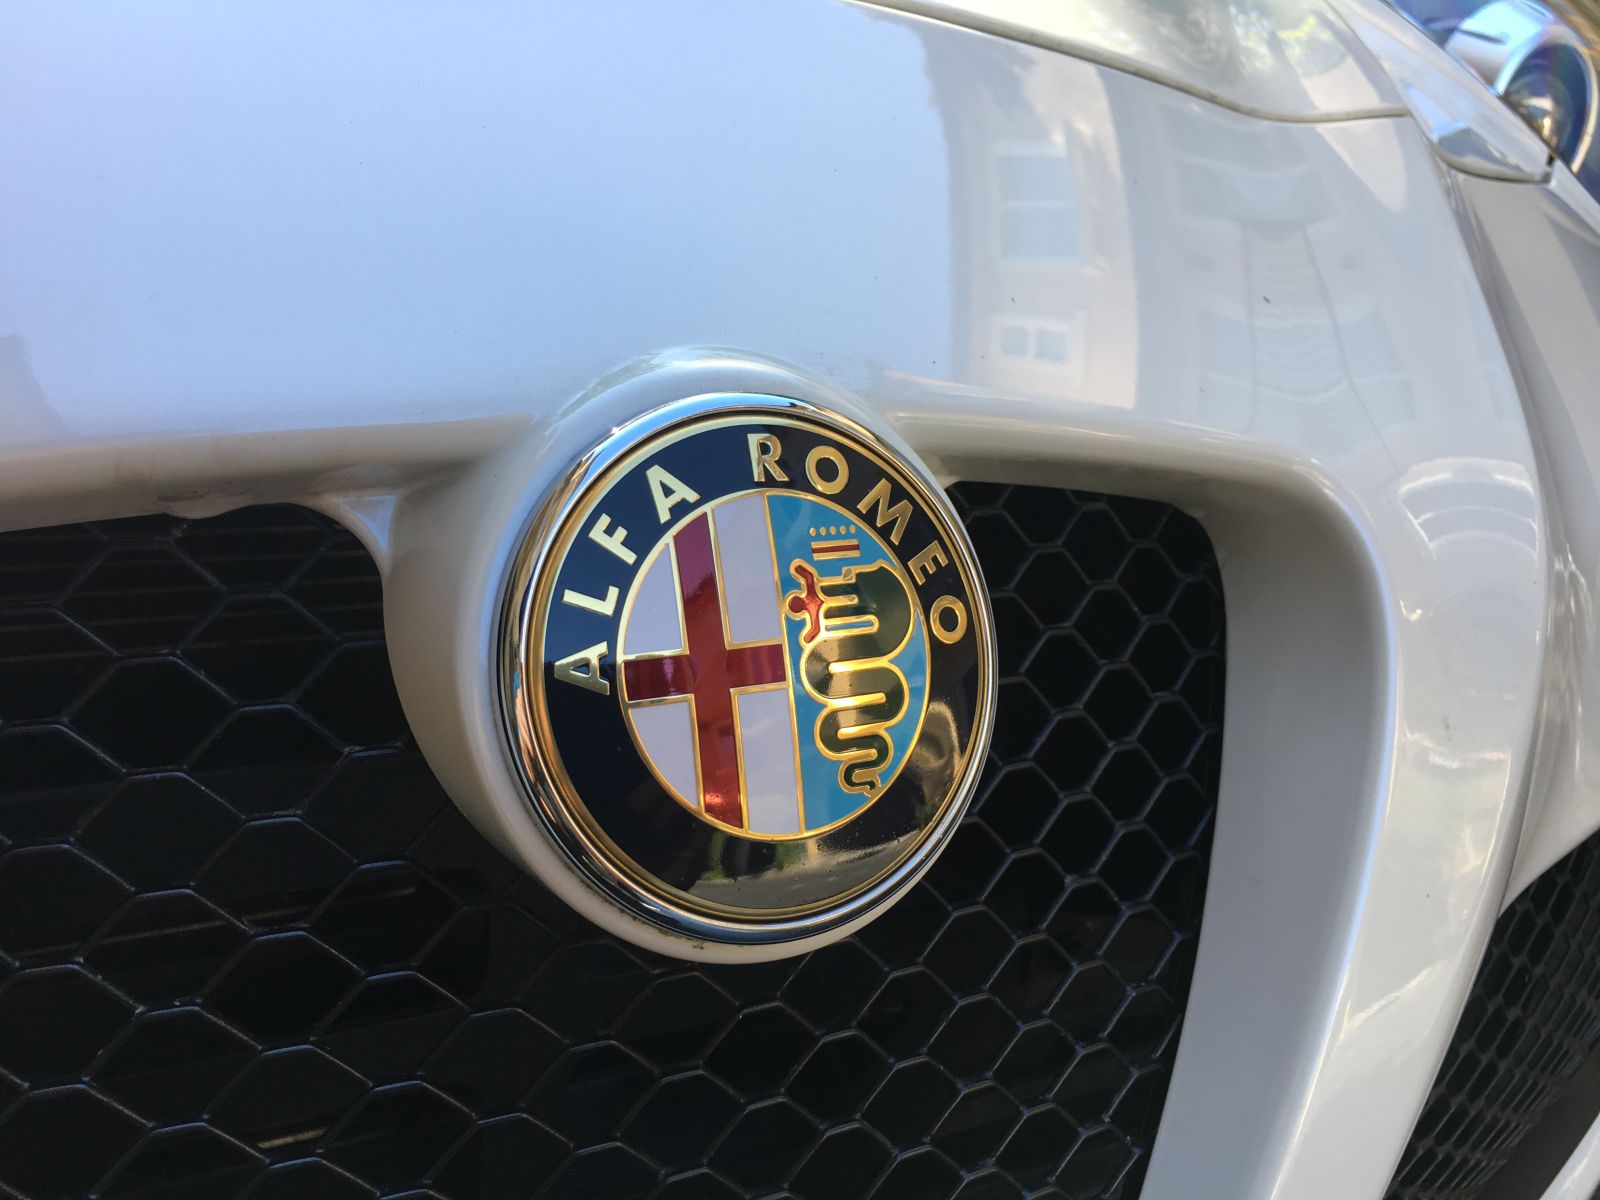 One styling detail that European cars consistently do well is the logo placement. European cars always have a raised nub or recessed body panel to “greet” the brand logo. It’s expensive, but does a lot to make a car look upscale. Alfa takes it to another level—there’s a special extension from the body just to frame it.